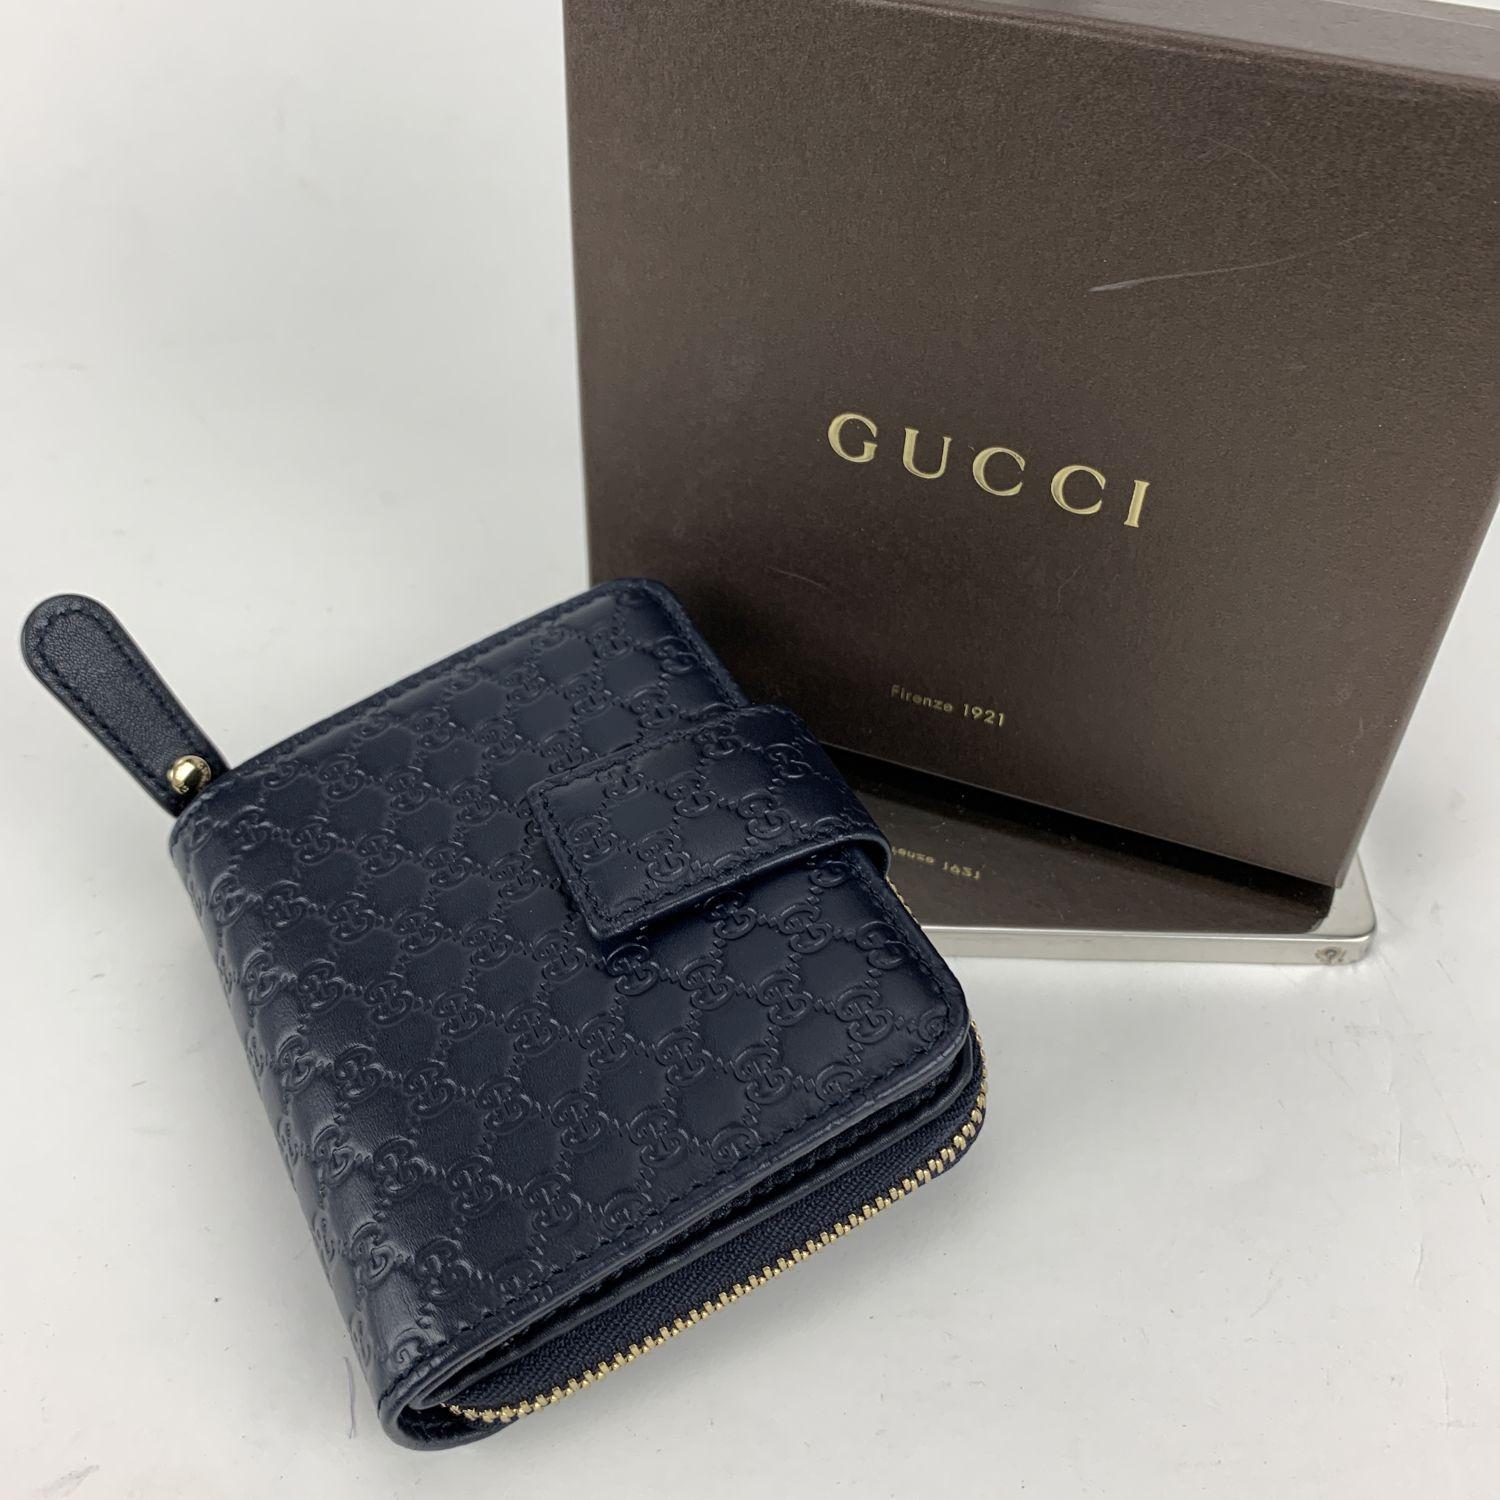 Gucci Black Leather Micro Guccissima Leather Compact Wallet Never Used 3